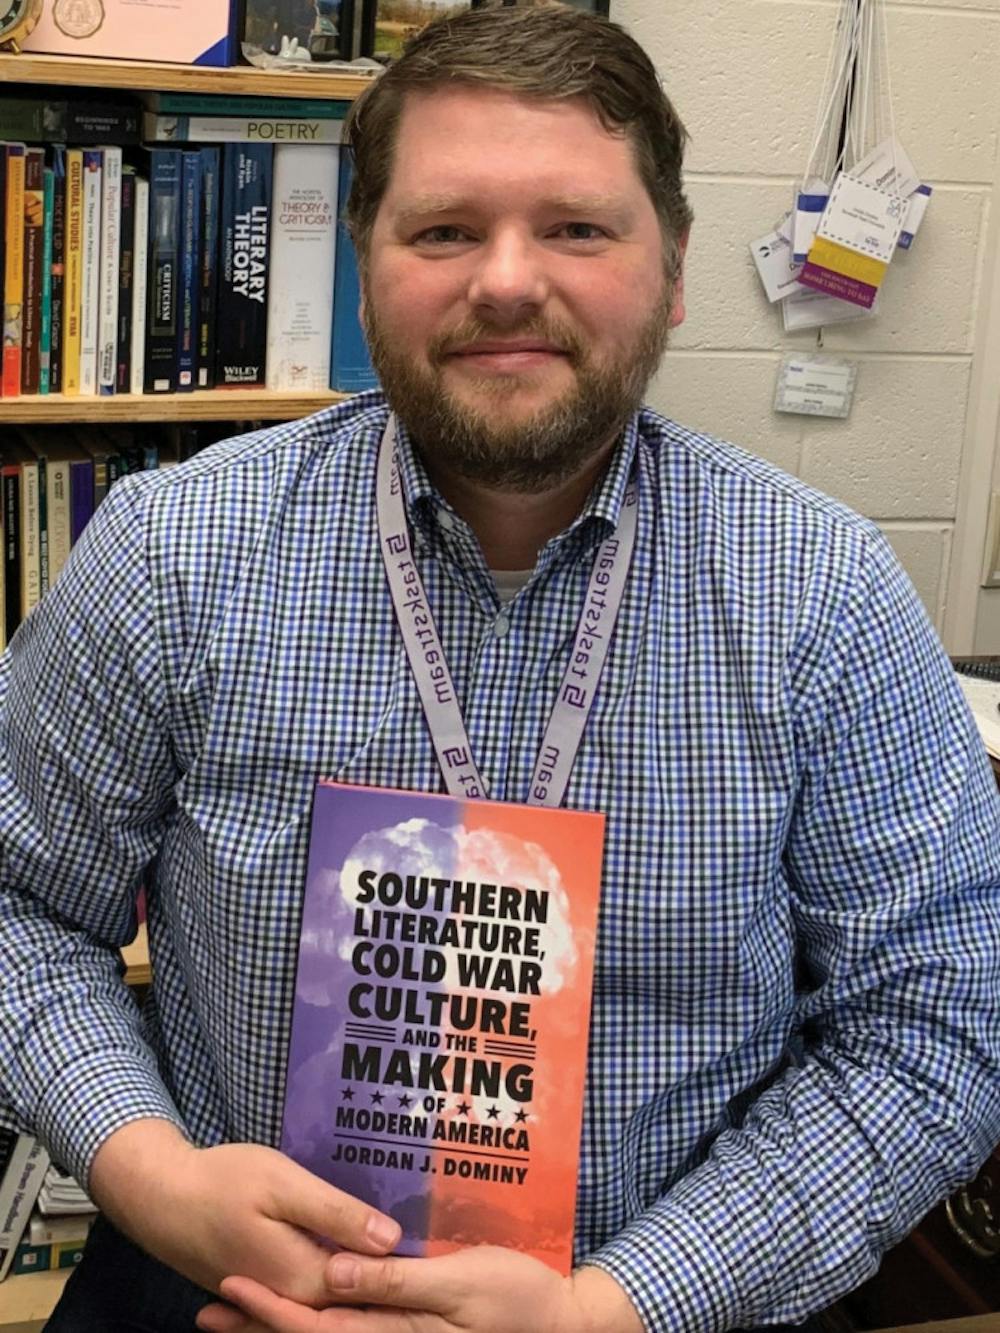 Jordan Dominy, Mercer alumni, has published a new book discussing the influence of Southern literature during the time of the Cold War. Photo provided by Jordan Dominy